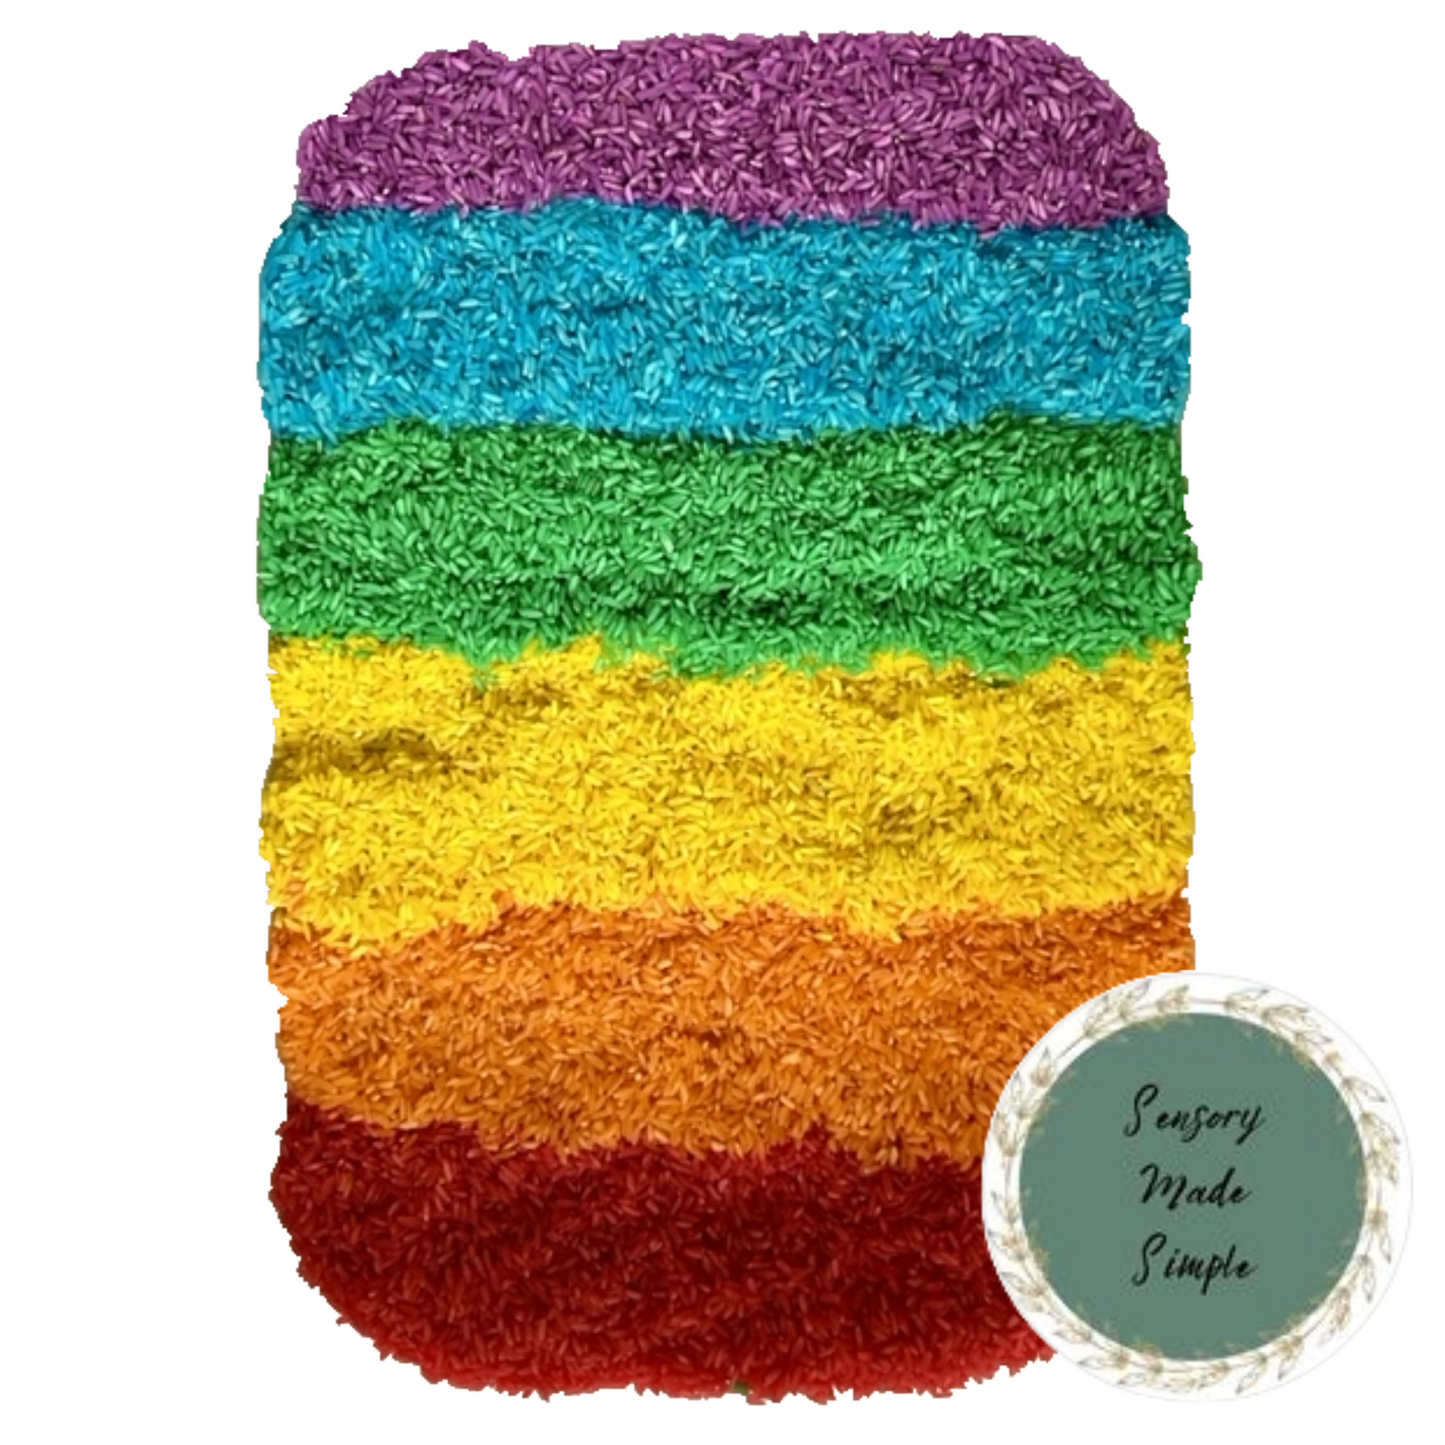 Dyed Rice Filler Sets by Sensory Made Simple